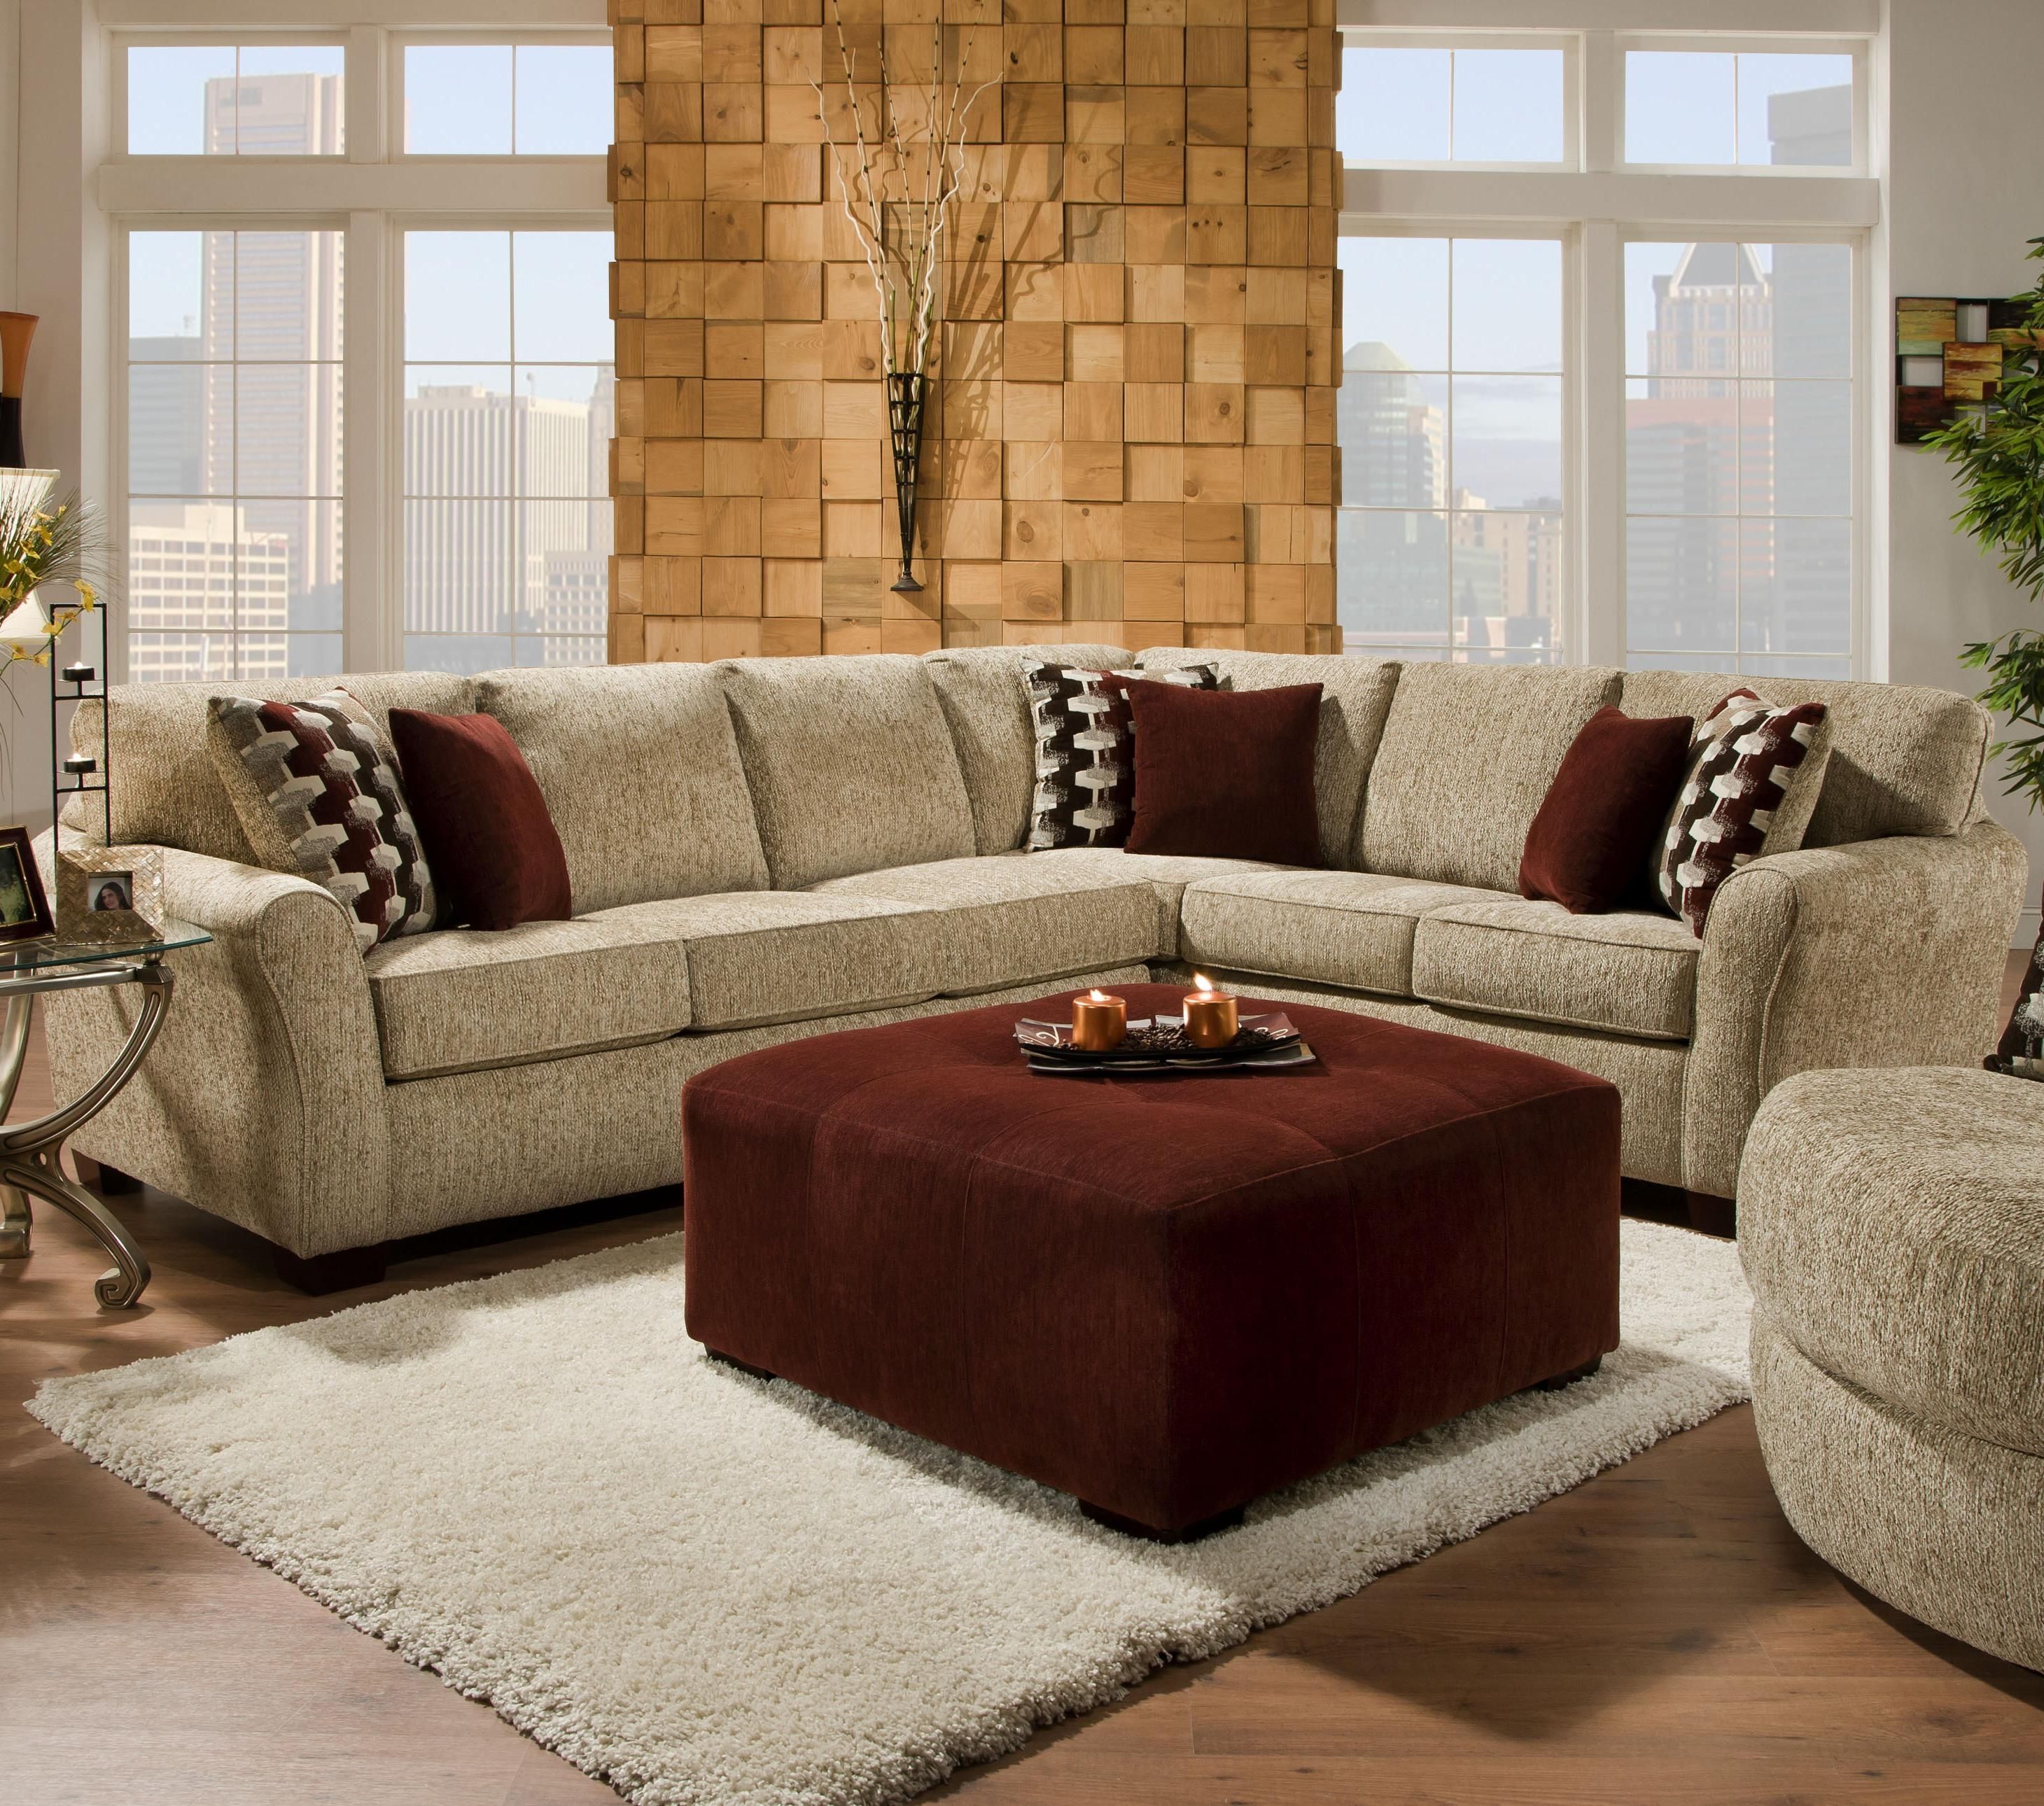 2500 Contemporary Styled Sectional Sofa With Sleepercorinthian Within Johnny Janosik Sectional Sofas (View 4 of 10)